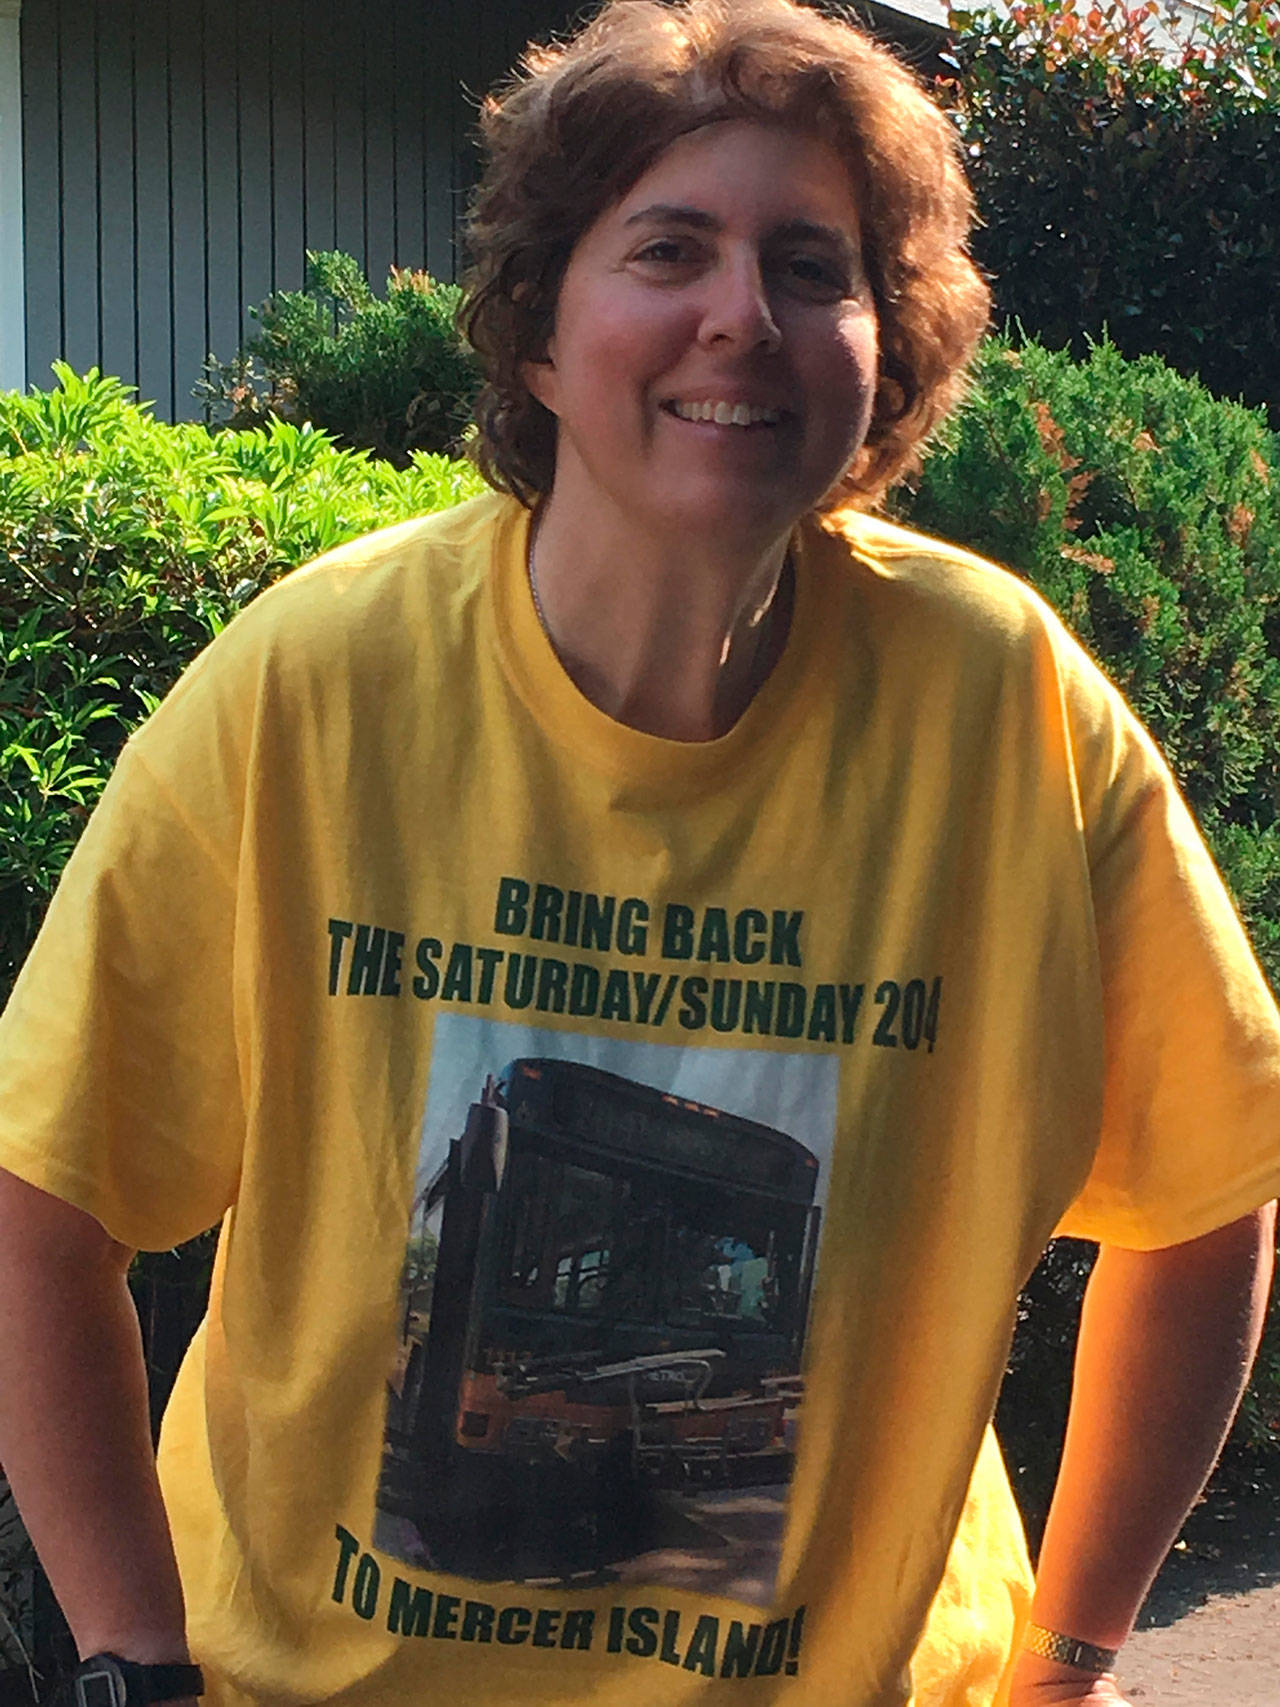 Mercer Islander Vicki Rouillard wearing her T-shirt she designed that states “Bring Back The Saturday/Sunday 204.” The shirt is yellow and green, the same colors as Metro’s buses.